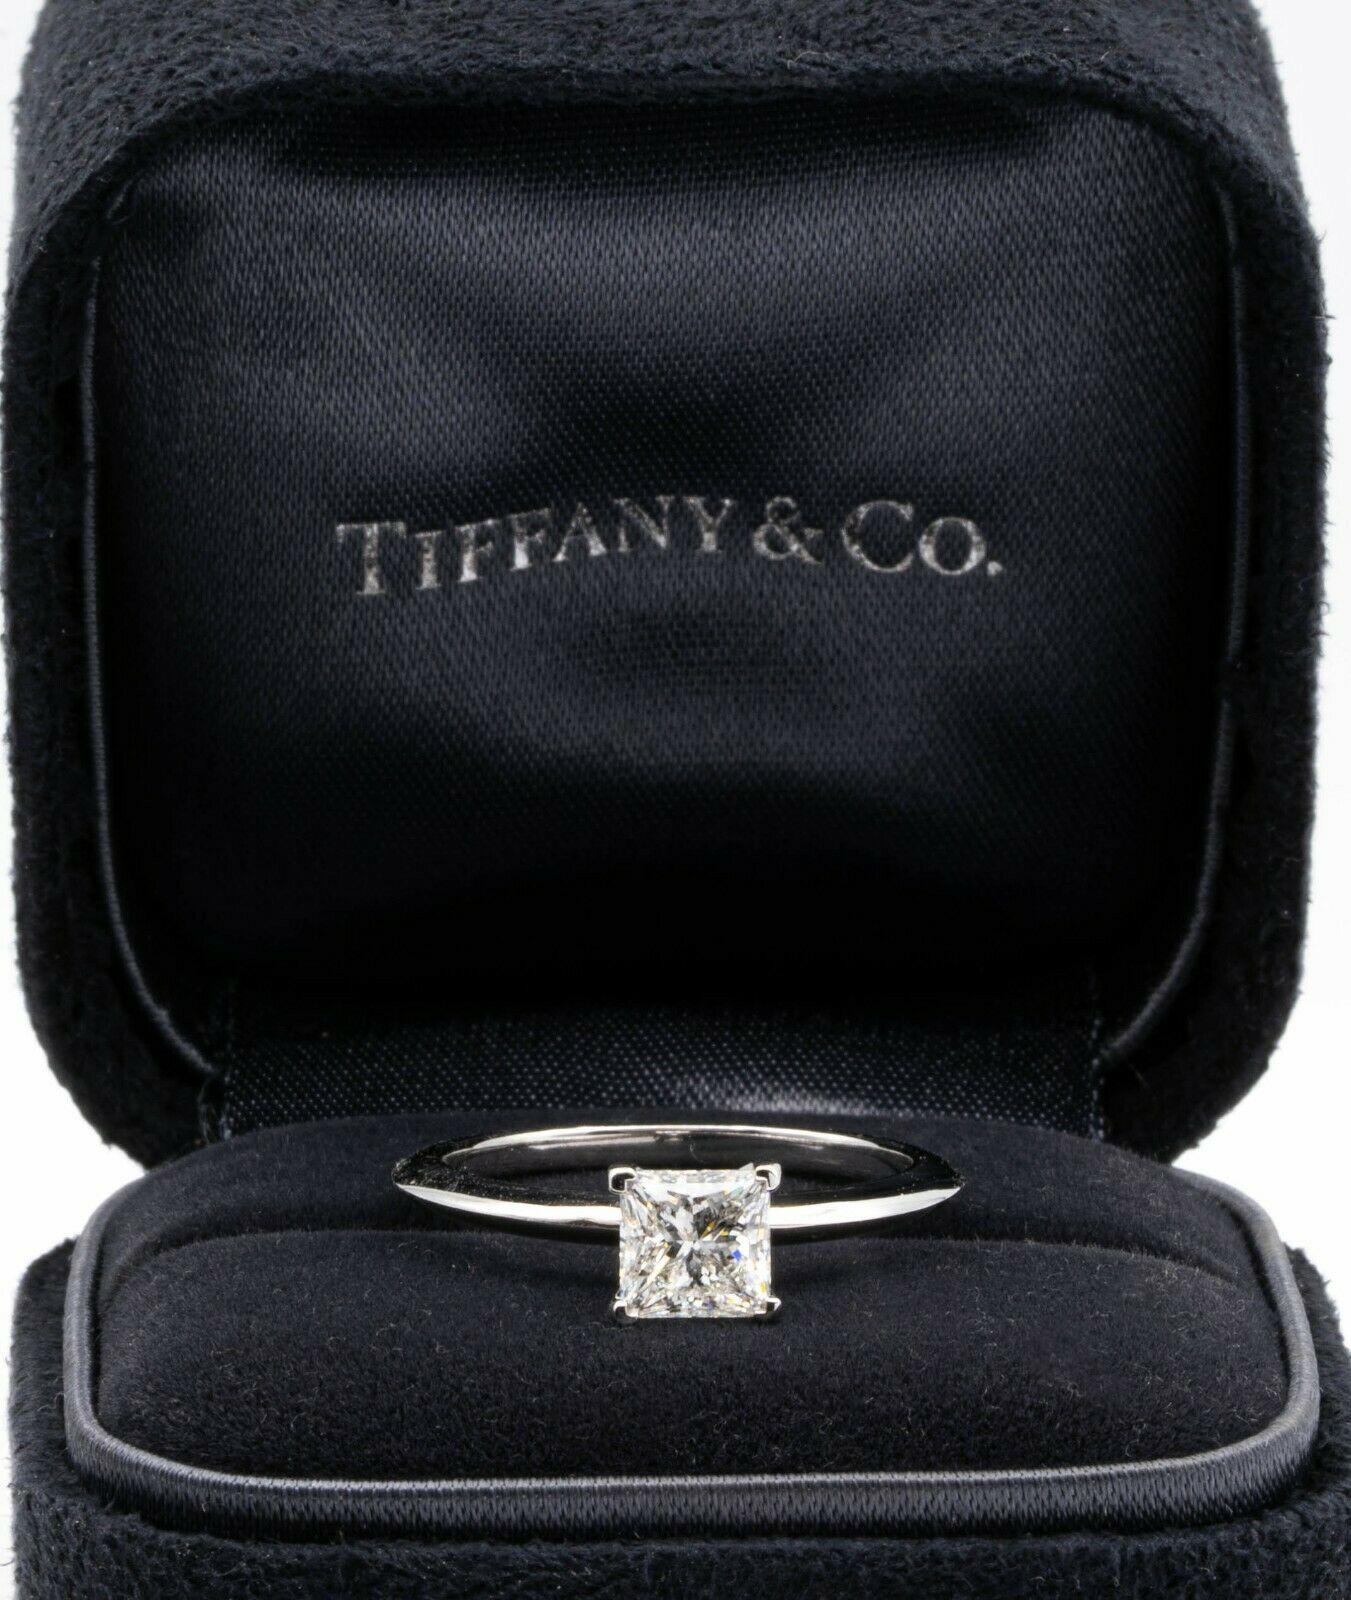 Classic Diamond Engagement Solitaire ring signed by Tiffany & Co. featuring a 4 prong set 0.94 ct Center princess cut diamond in platinum.Graded by Tiffany G color , and VS1 Clarity. Current Retail price : $9,600
Includes Original Tiffany